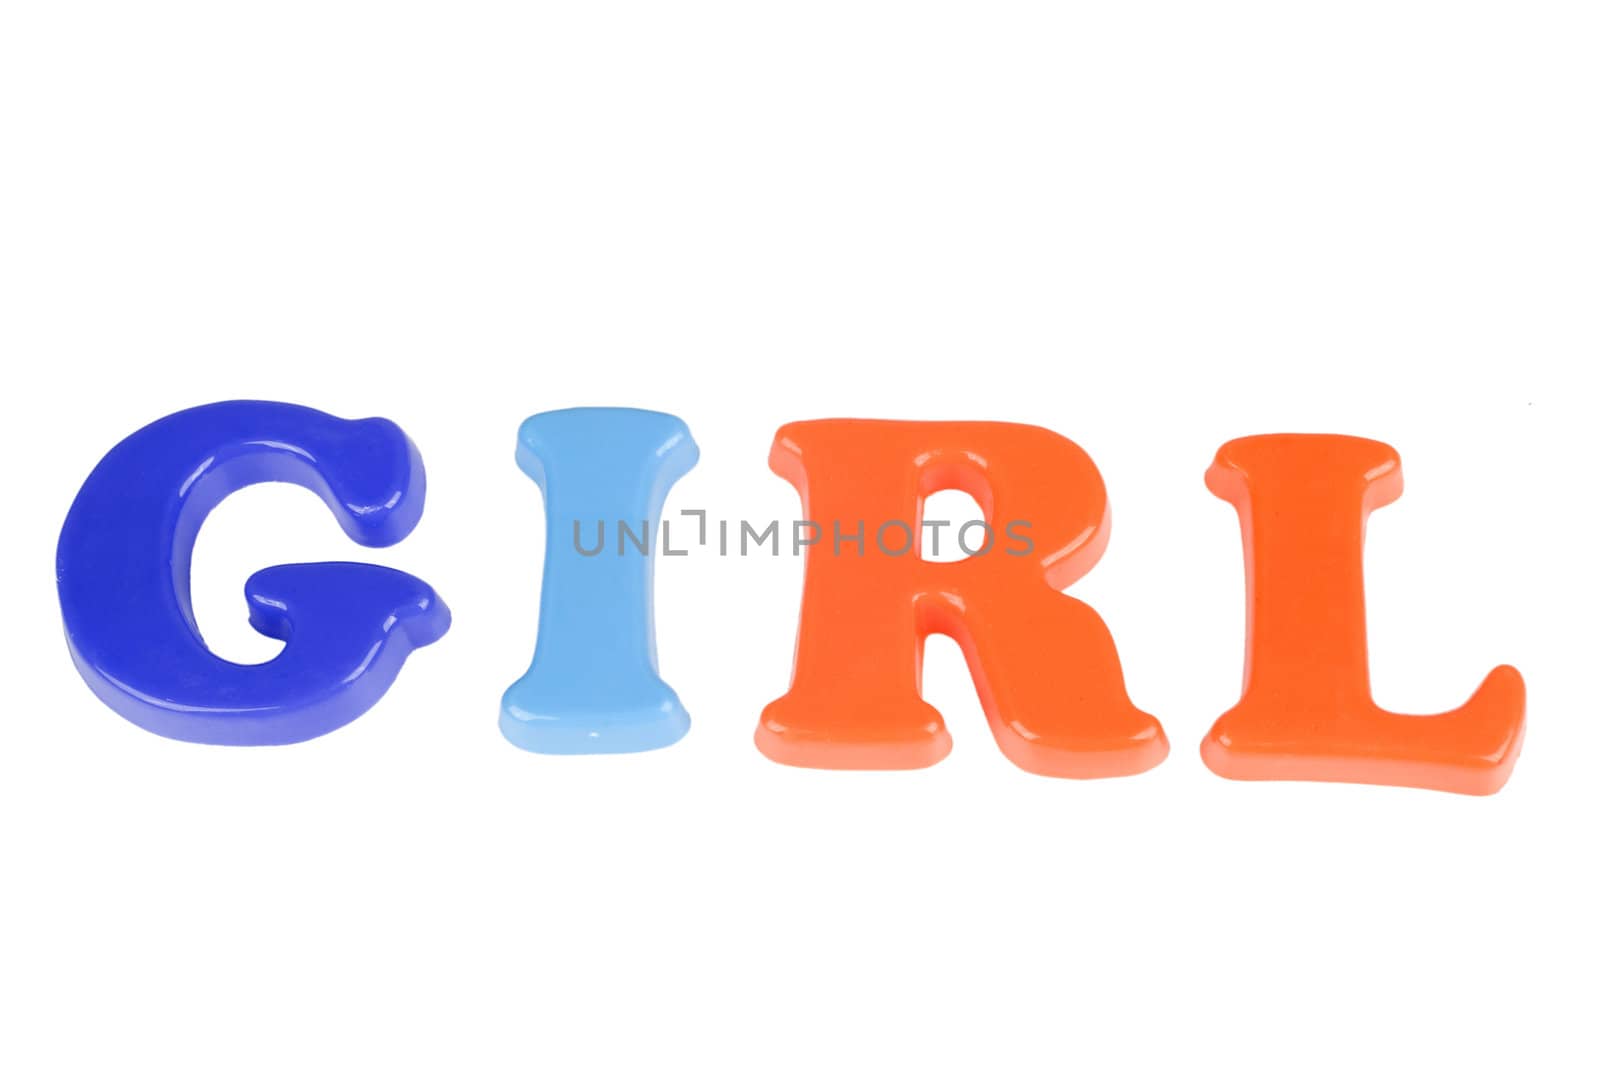 the word "girl" made of colorful letters